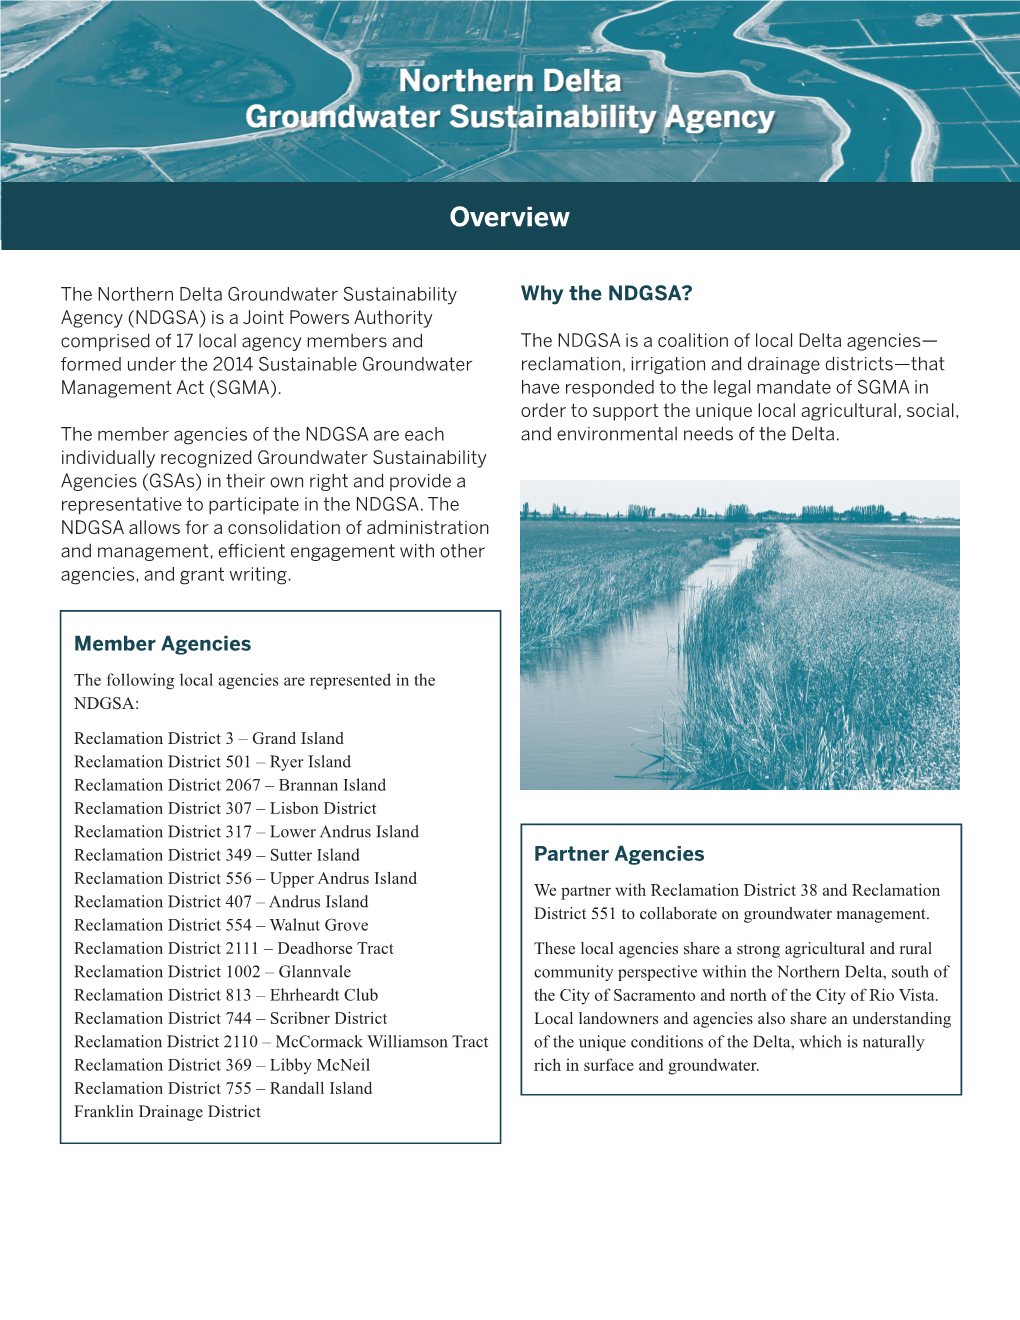 Northern Delta Groundwater Sustainability Agency